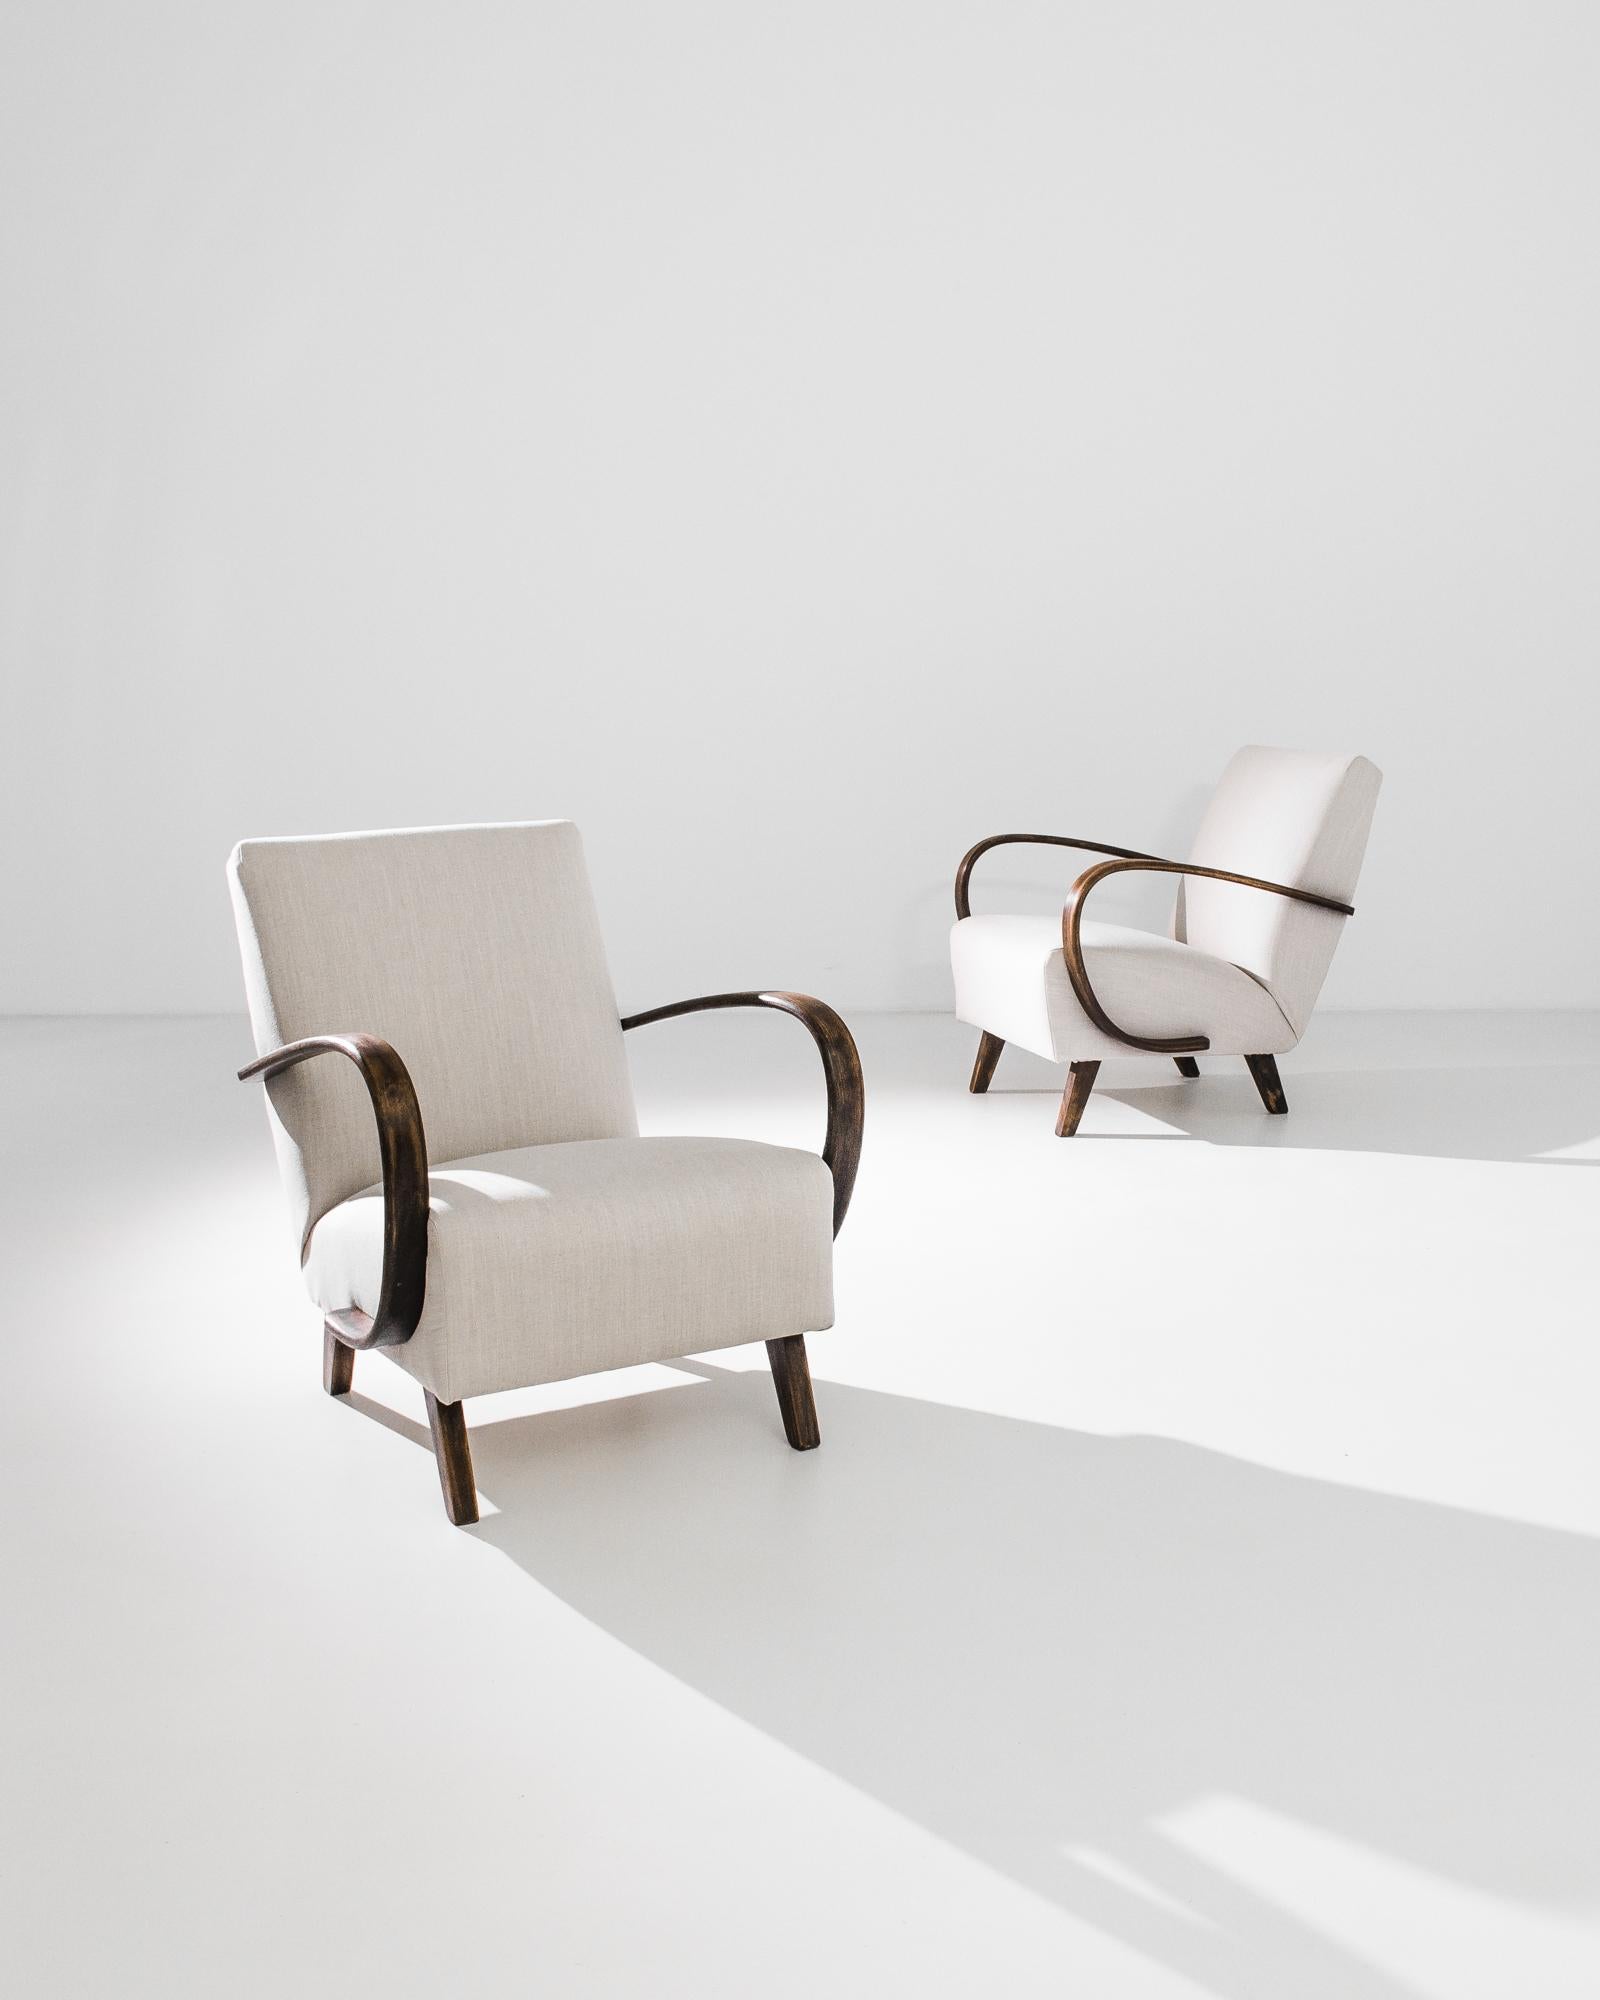 A pair of armchairs by Czech furniture designer J. Halabala. Made in the 1950s, the design was produced in Central European furniture factories throughout the mid-20th Century. The eye-catching silhouette and comfortable shape has had an enduring